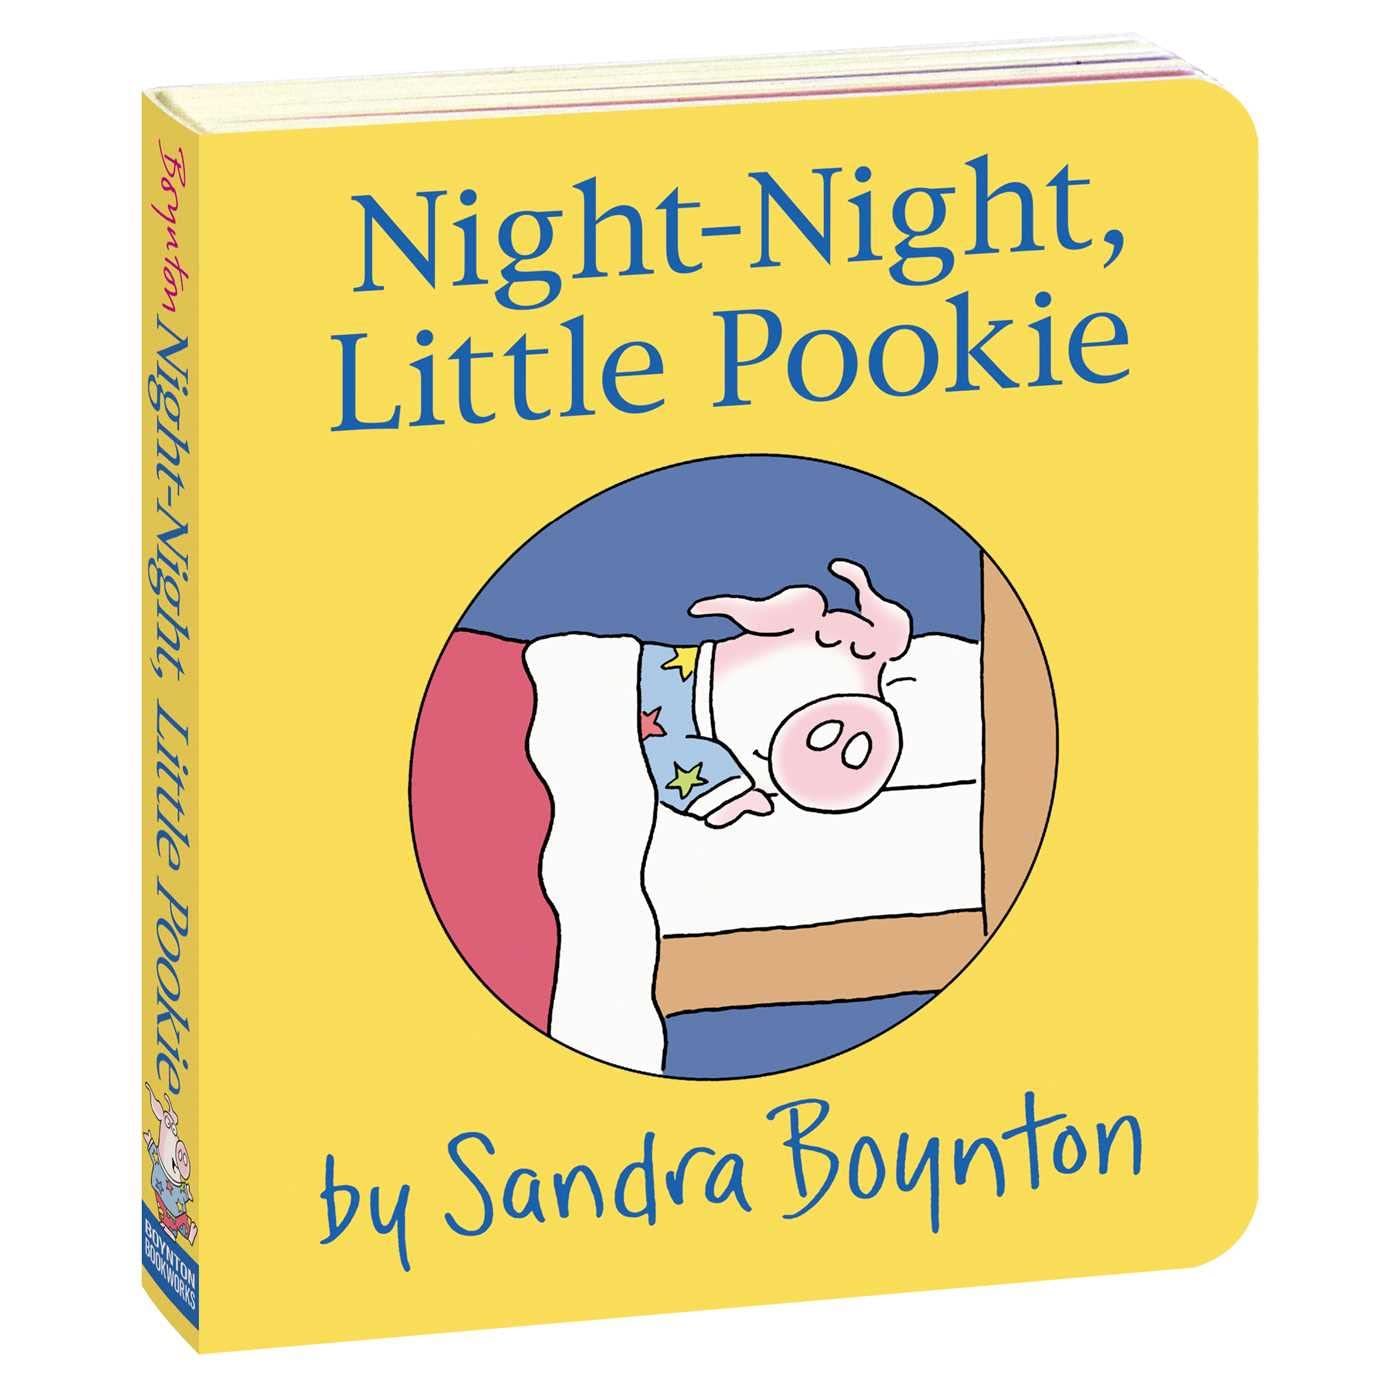 Big Box of Little Pookie Everyday (Boxed Set): Night-Night, Little Pookie; What's Wrong, Little Pookie?; Let's Dance, Little Pookie; Little Pookie; Happy Birthday, Little Pookie